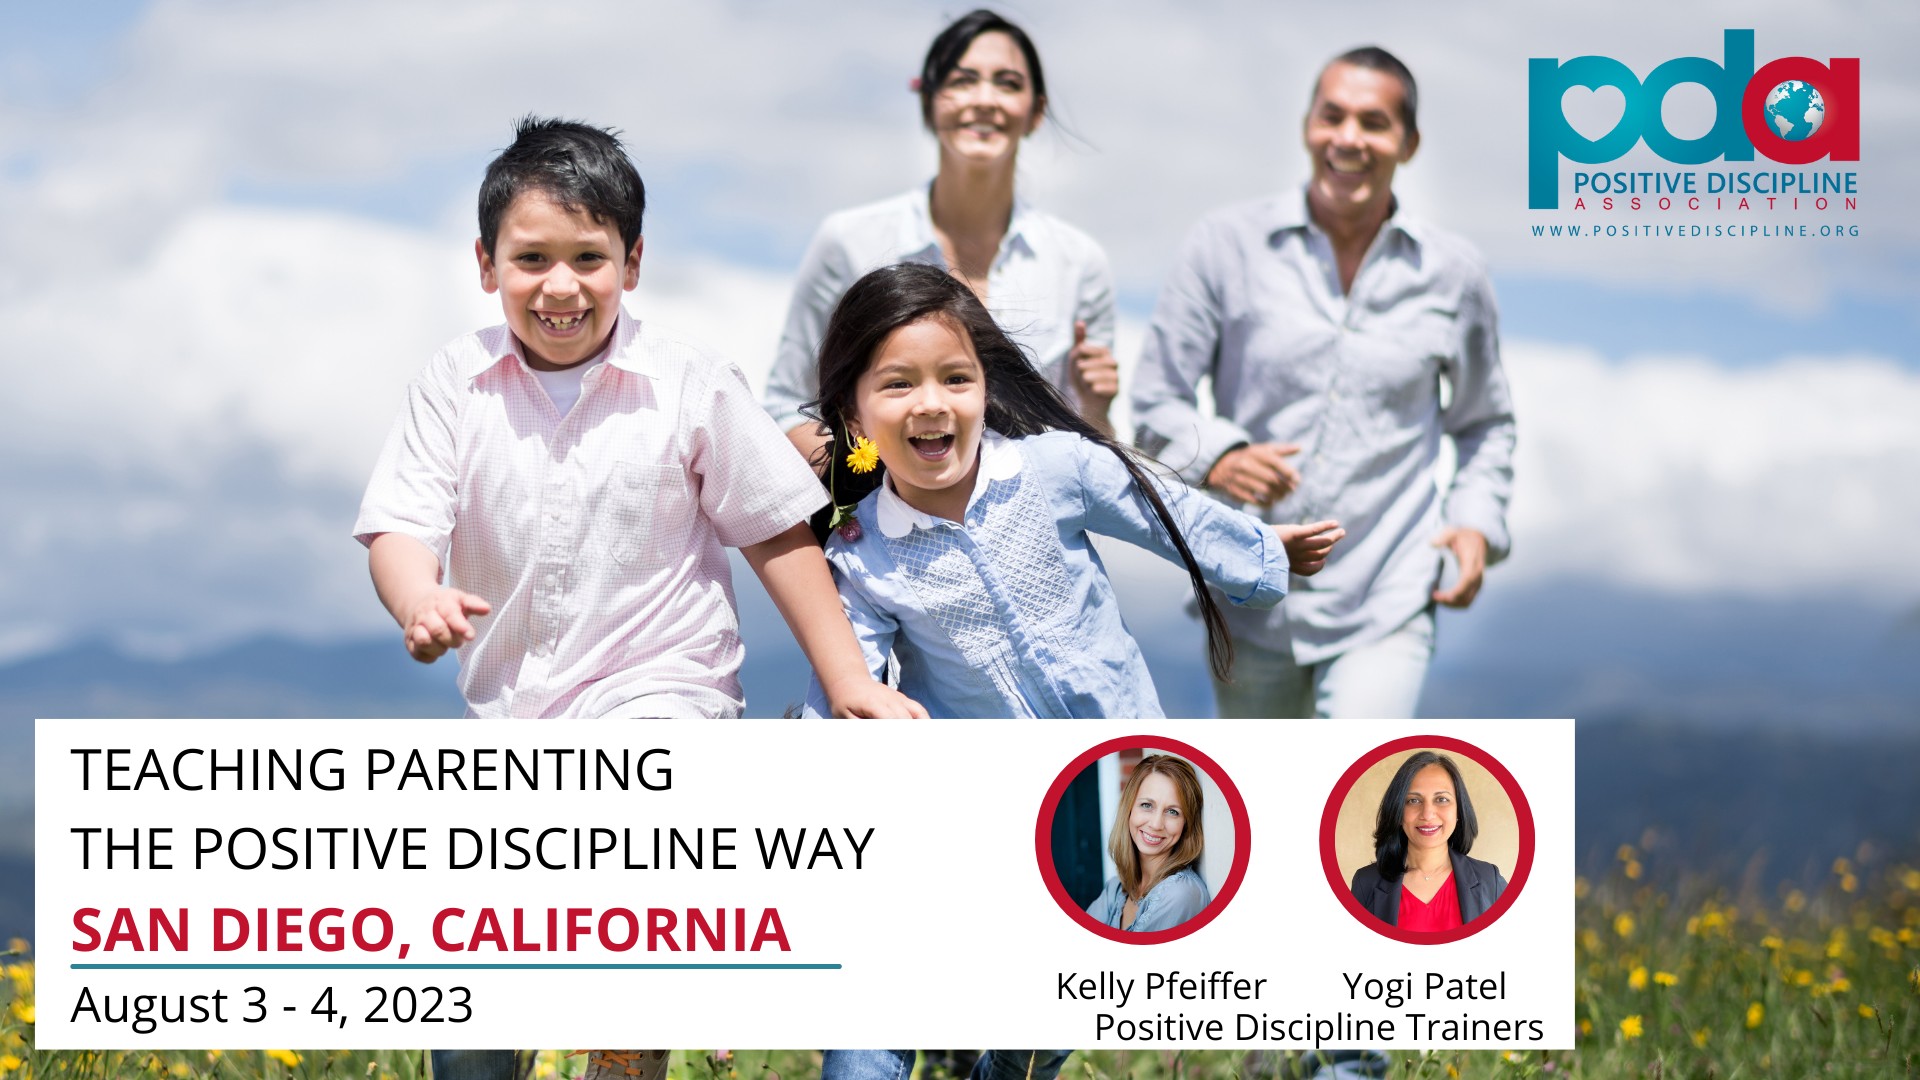 Teaching Parenting with Positive Discipline in San Diego